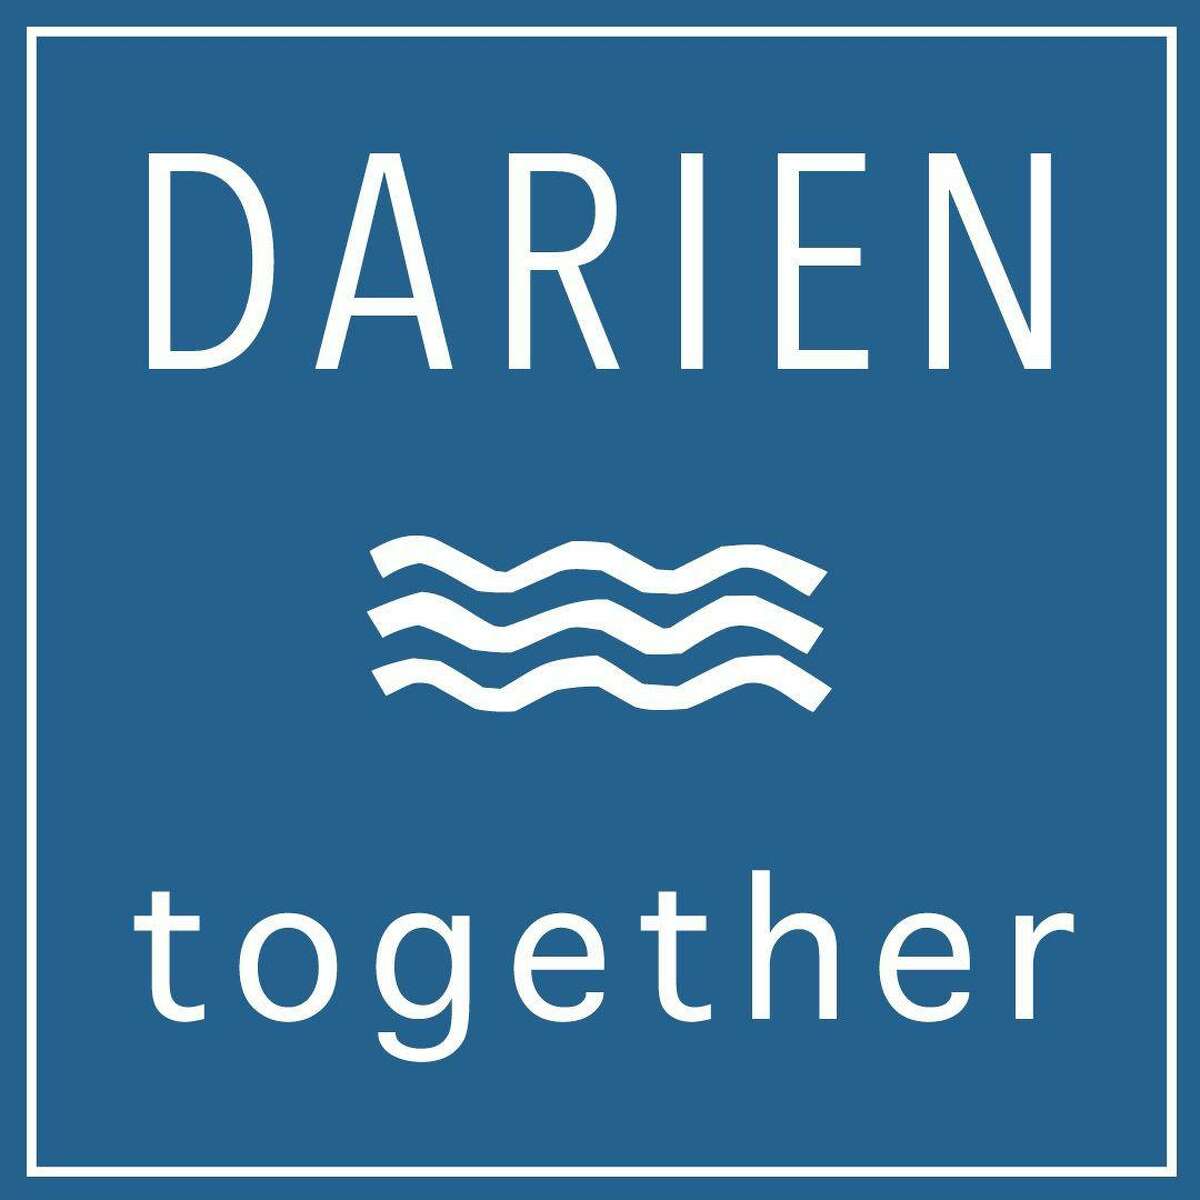 The Corbin District is teaming up with the Darien Chamber of Commerce for a shopping contest this holiday season in Darien